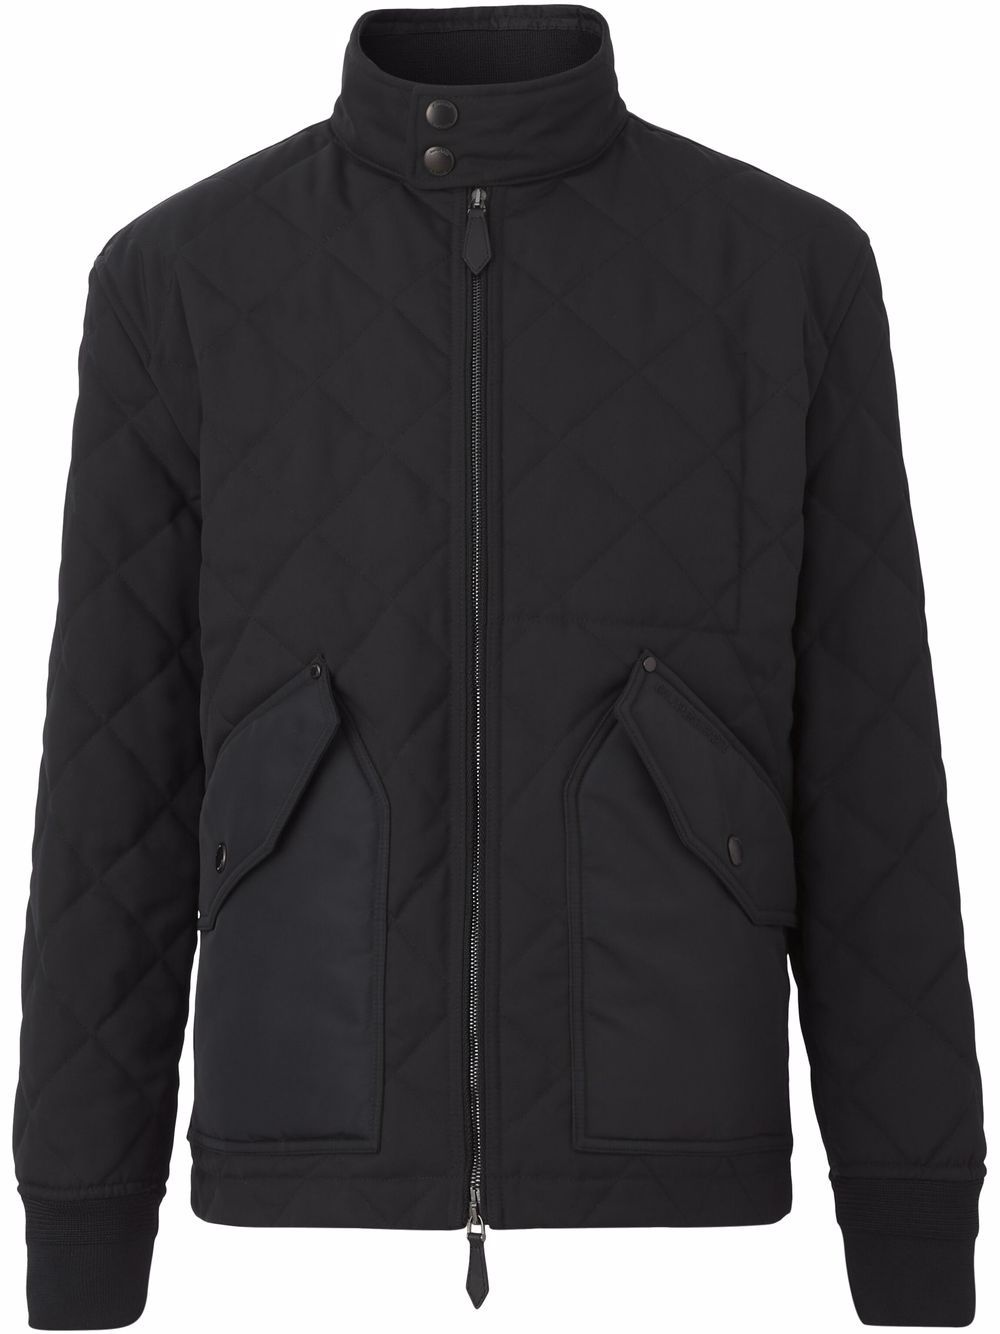 diamond-quilted thermoregulated jacket - 1